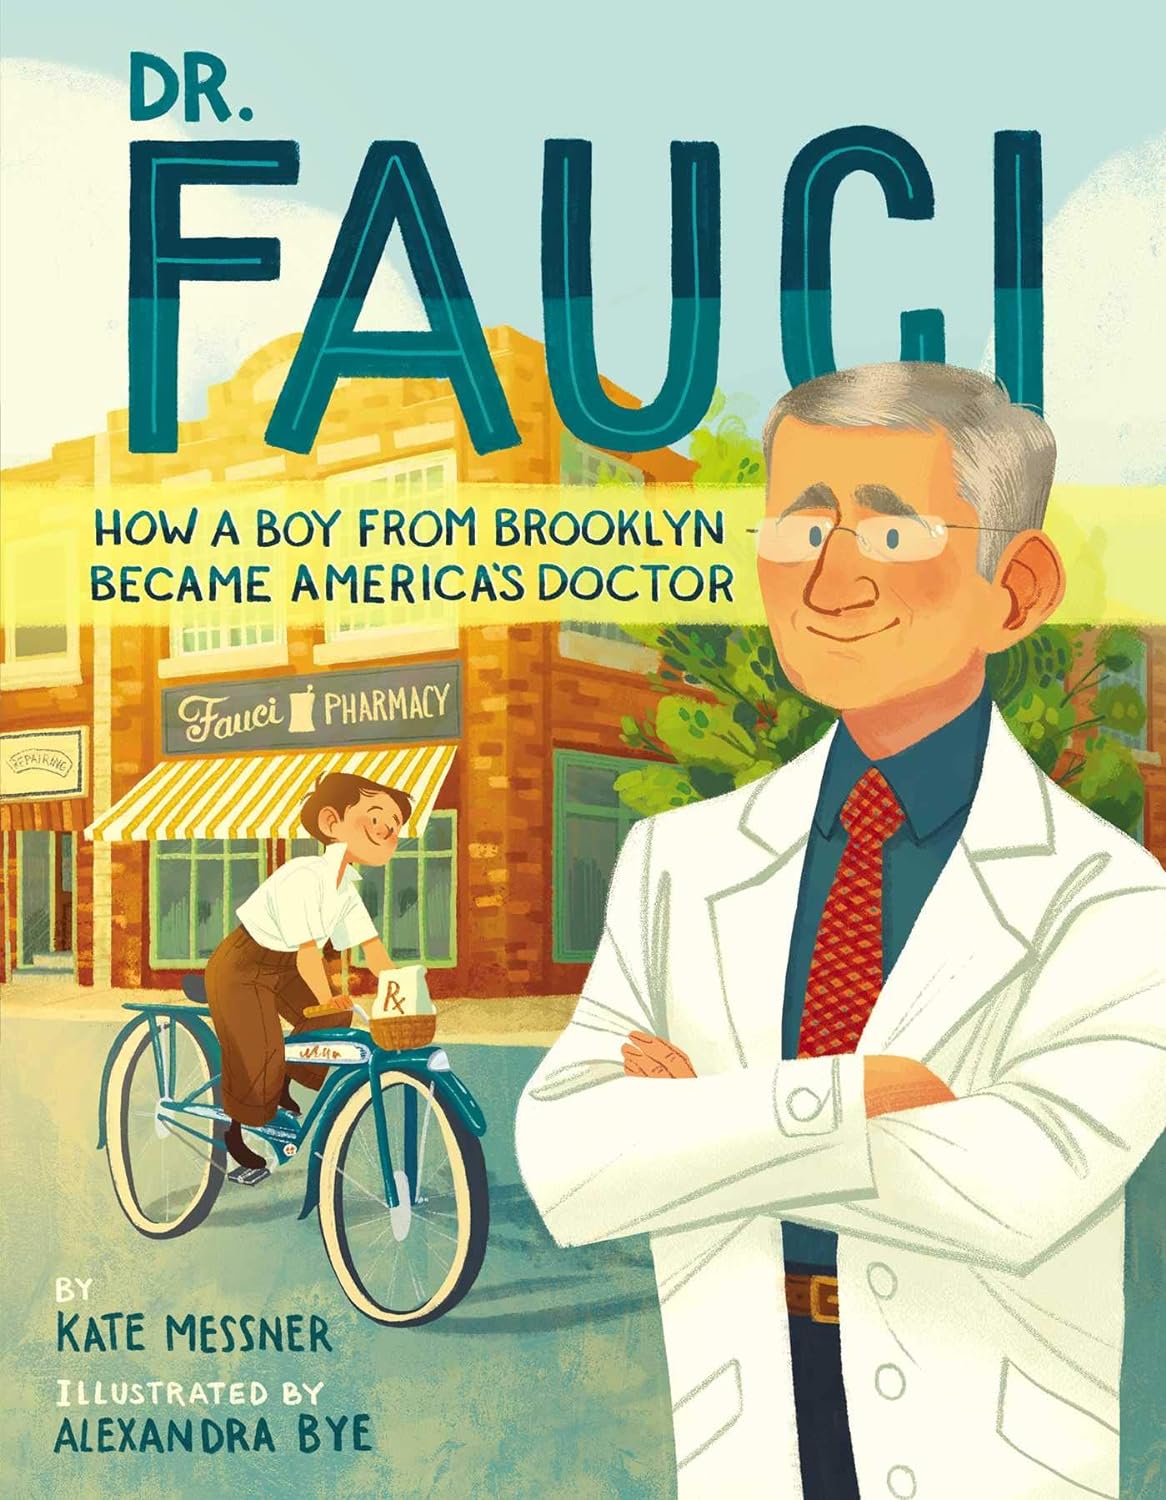 Dr. Fauci: How a Boy from Brooklyn Became America's Doctor